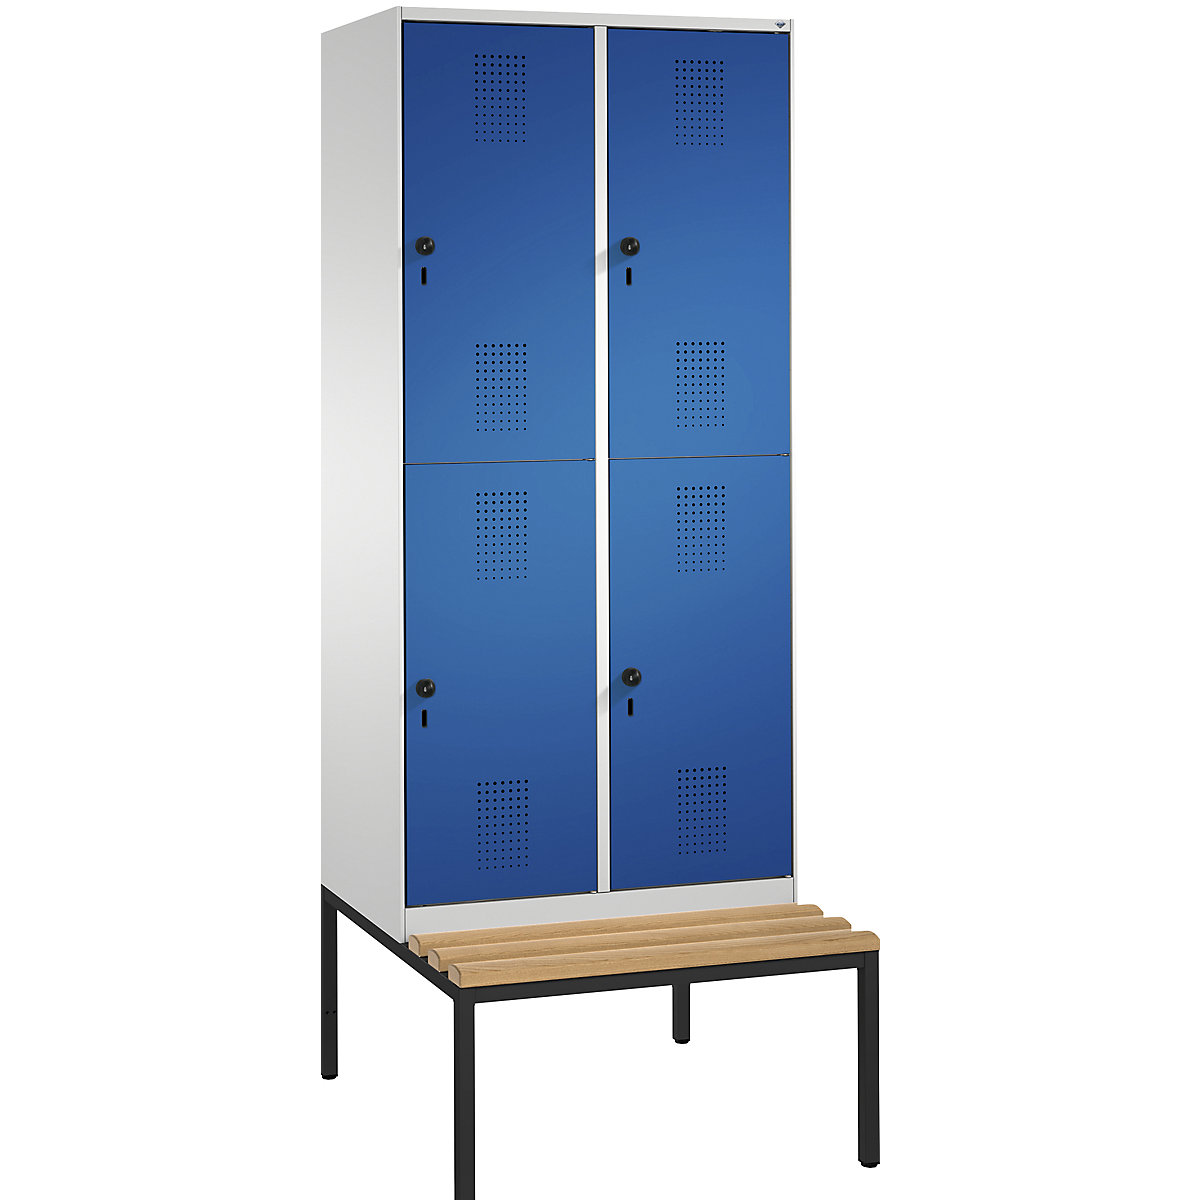 EVOLO cloakroom locker, double tier, with bench – C+P, 2 compartments, 2 shelf compartments each, compartment width 400 mm, light grey / gentian blue-8